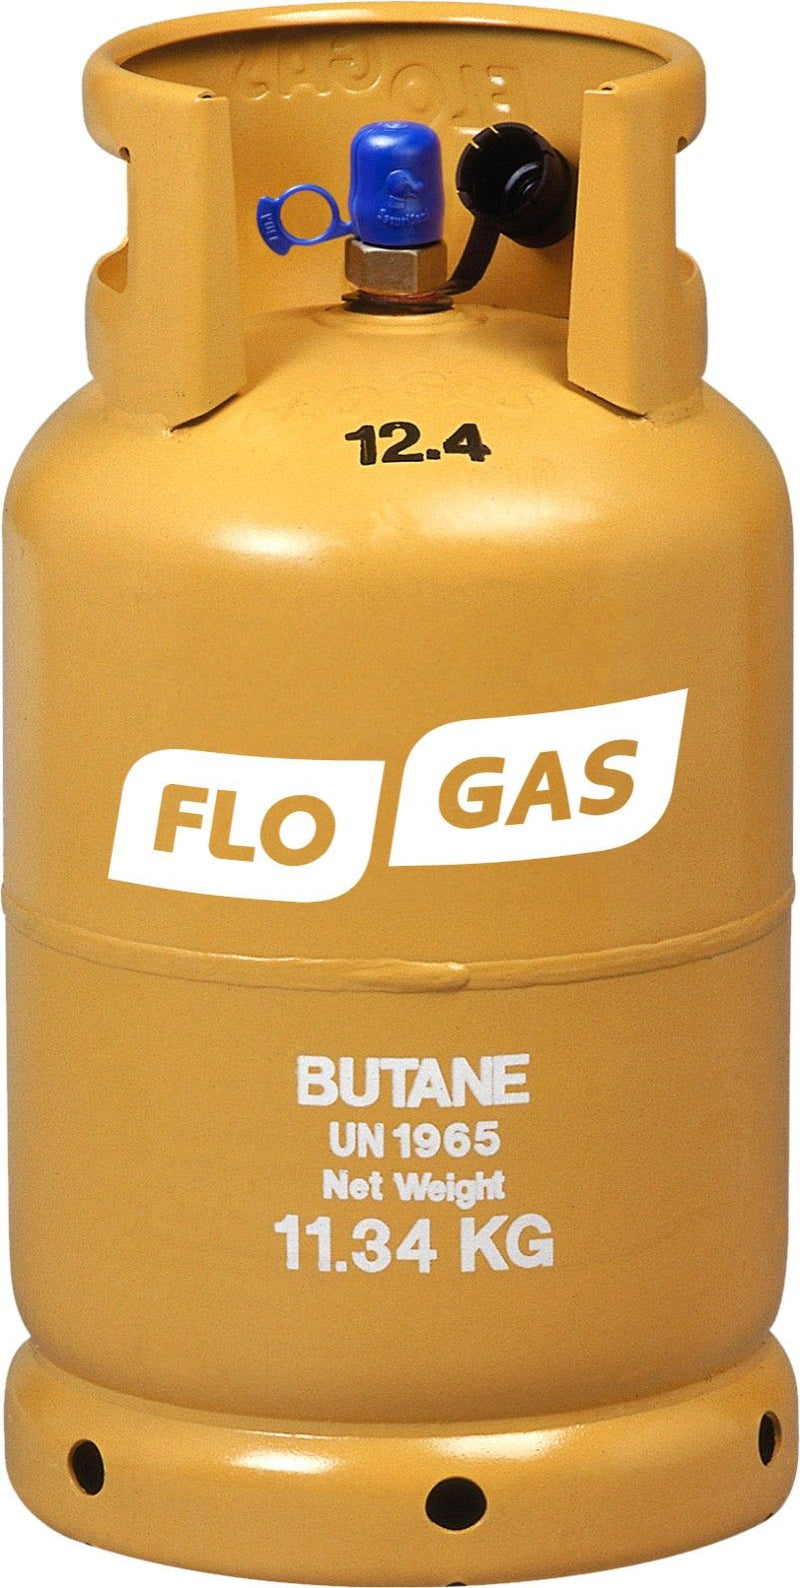 Flogas Butane Gas 11kg - refill  - COLLECT IN MOIRA OR SAINTFIELD STORES DELIVERY NOT AVAILABLE